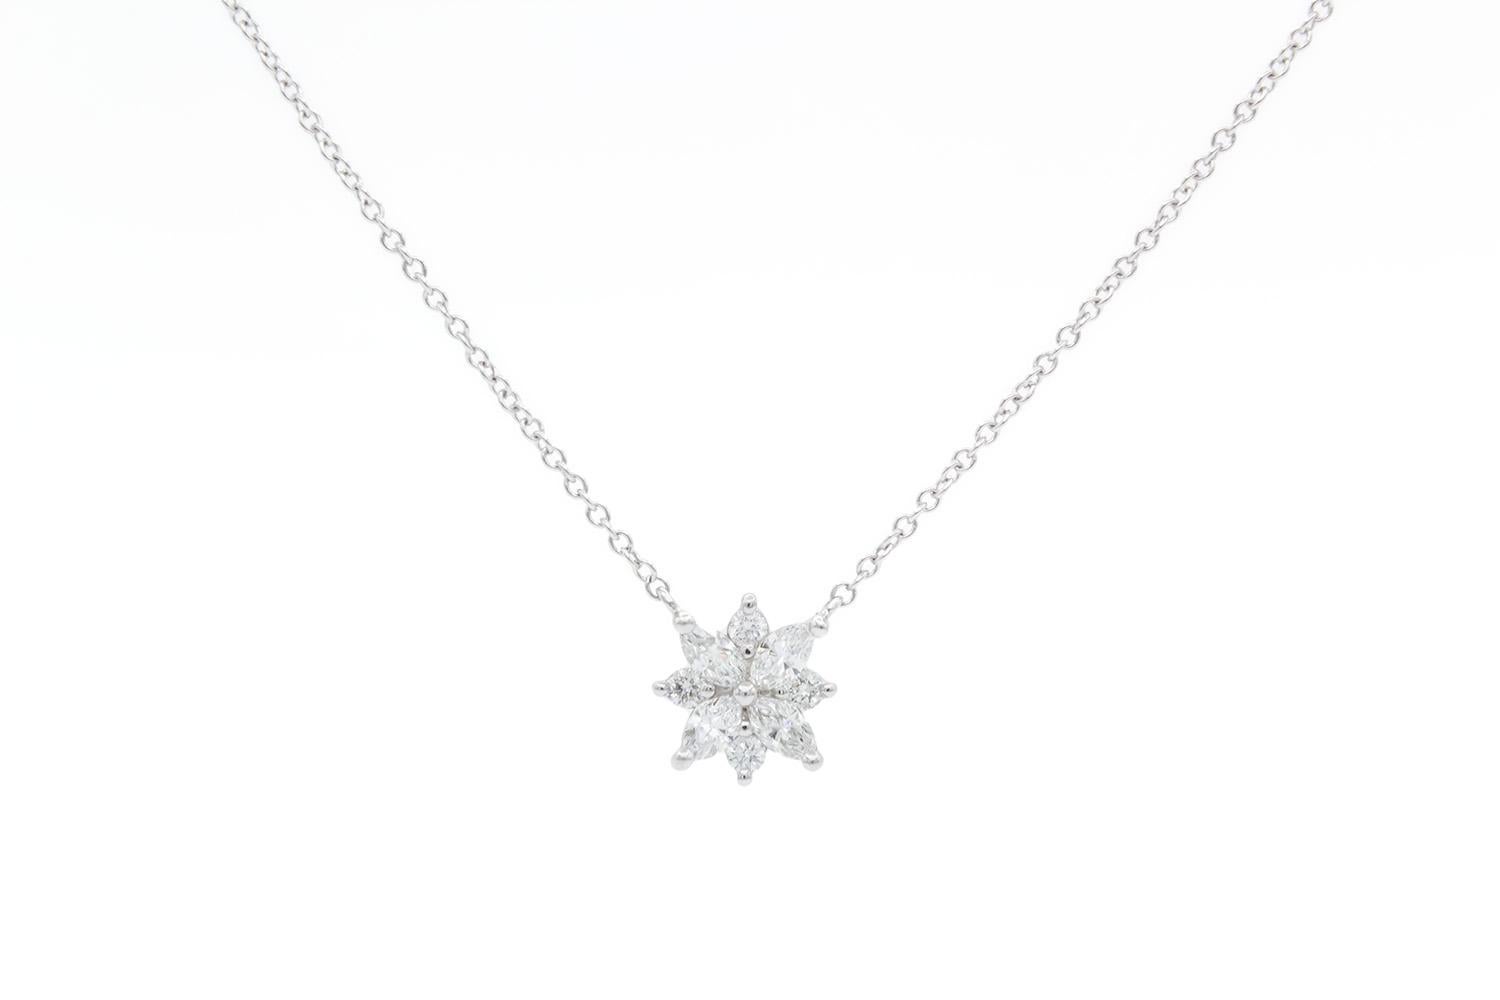 We are pleased to offer this Authentic Tiffany & Co. Victoria Cluster Platinum & Diamond Pendant Necklace. This gorgeous diamond pendant necklace features the classic Tiffany Victoria styling with a twist! The necklace measures 16.5